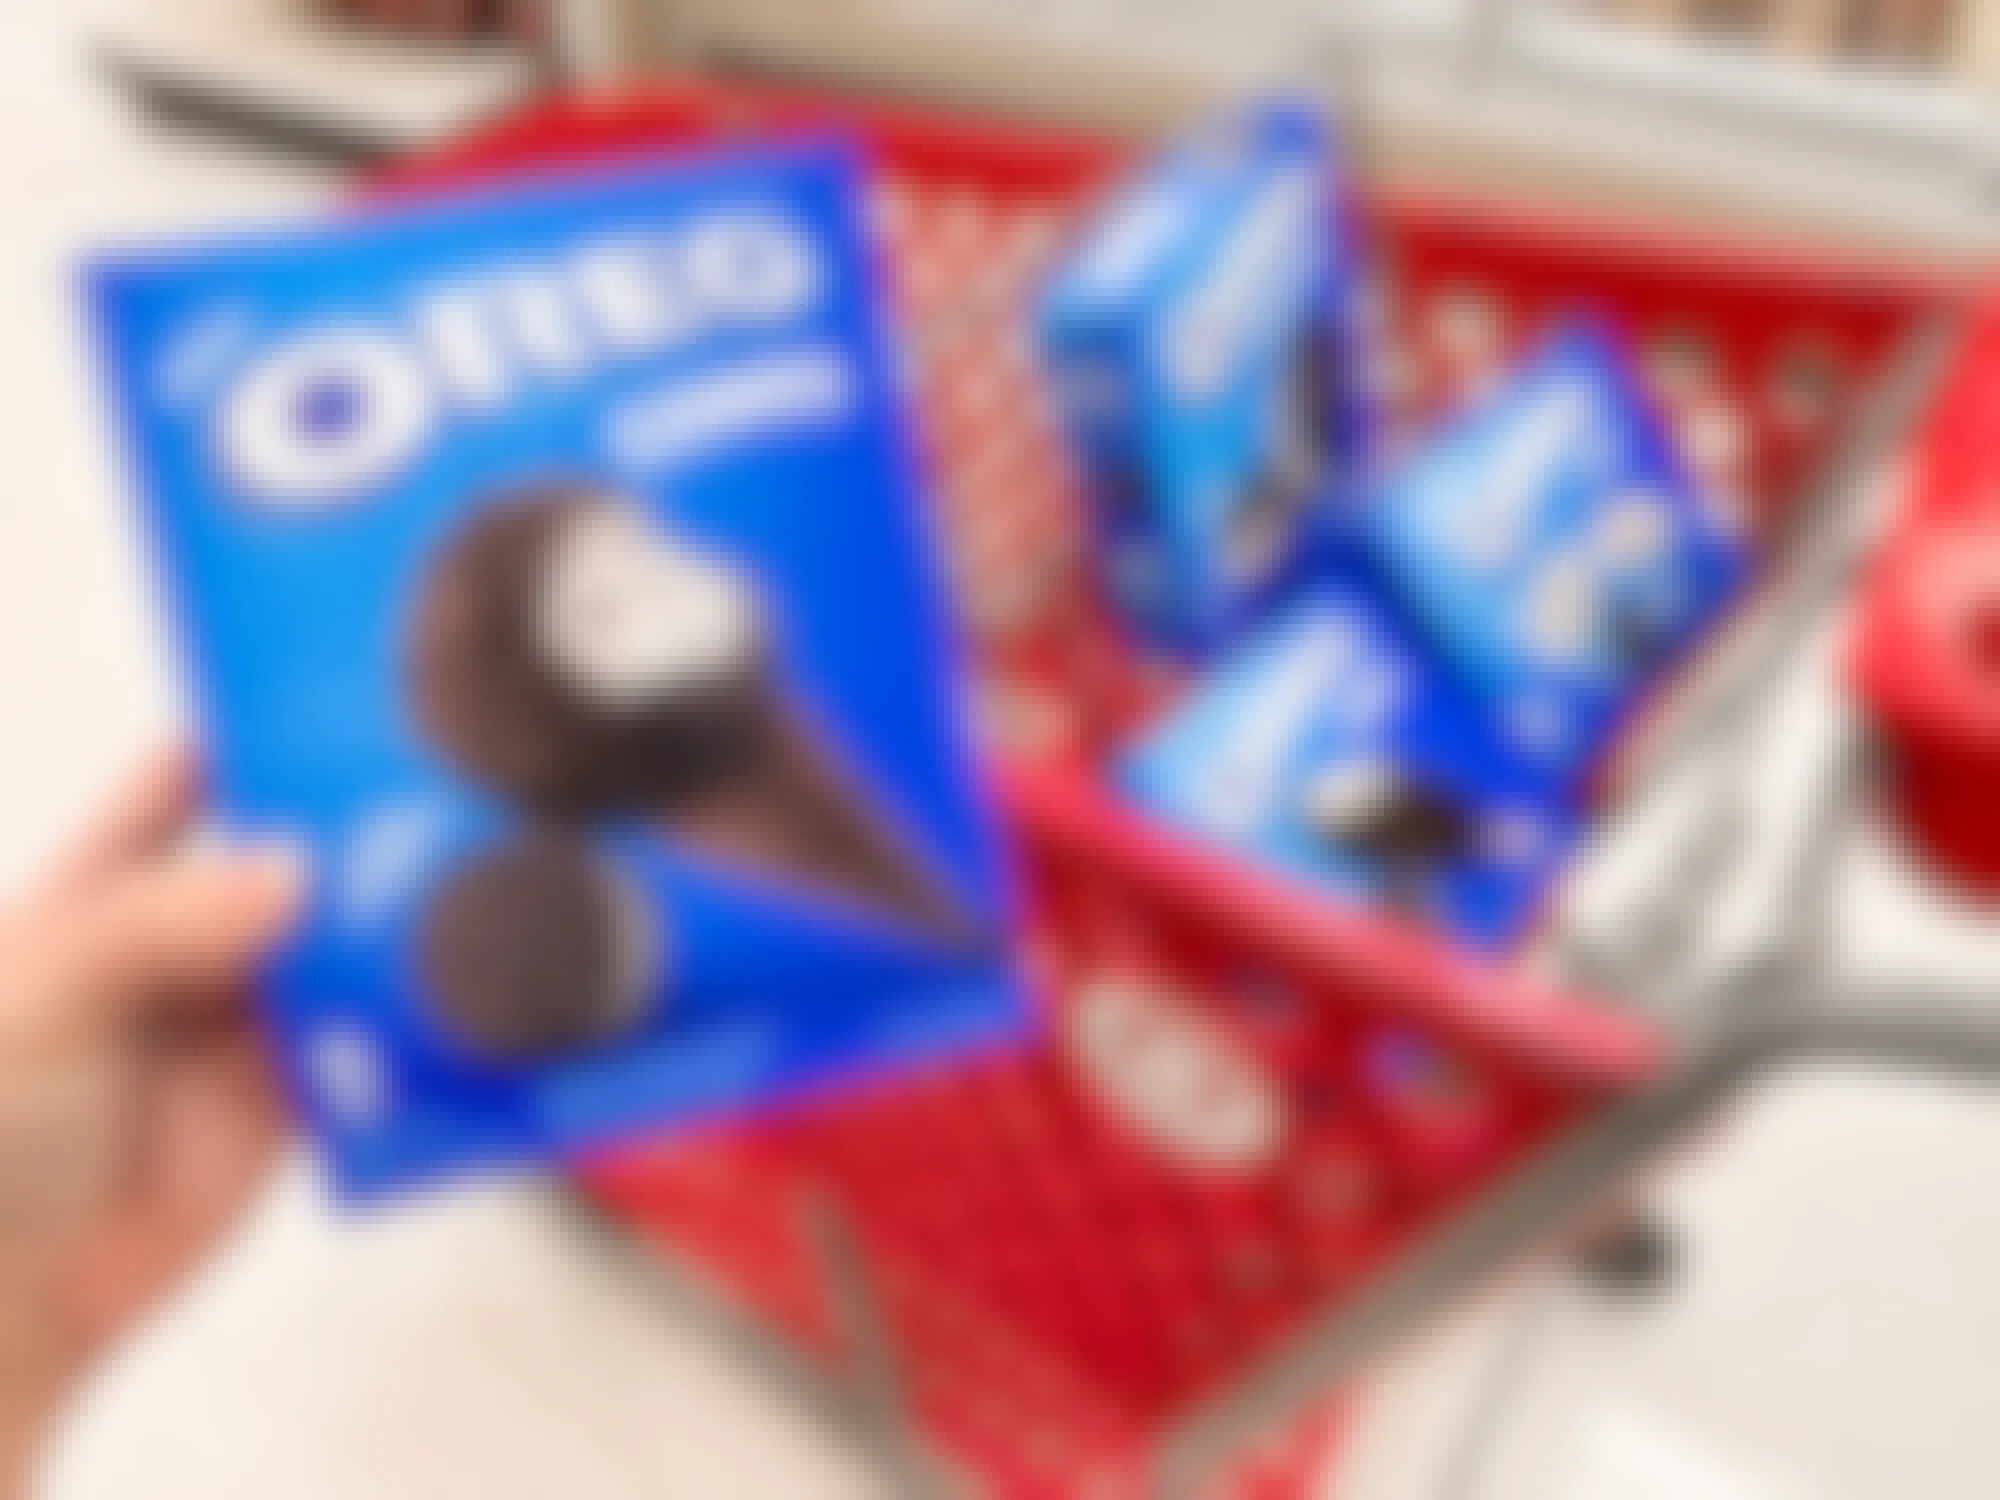 Someone filling their Target shopping cart with Oreo frozen treats